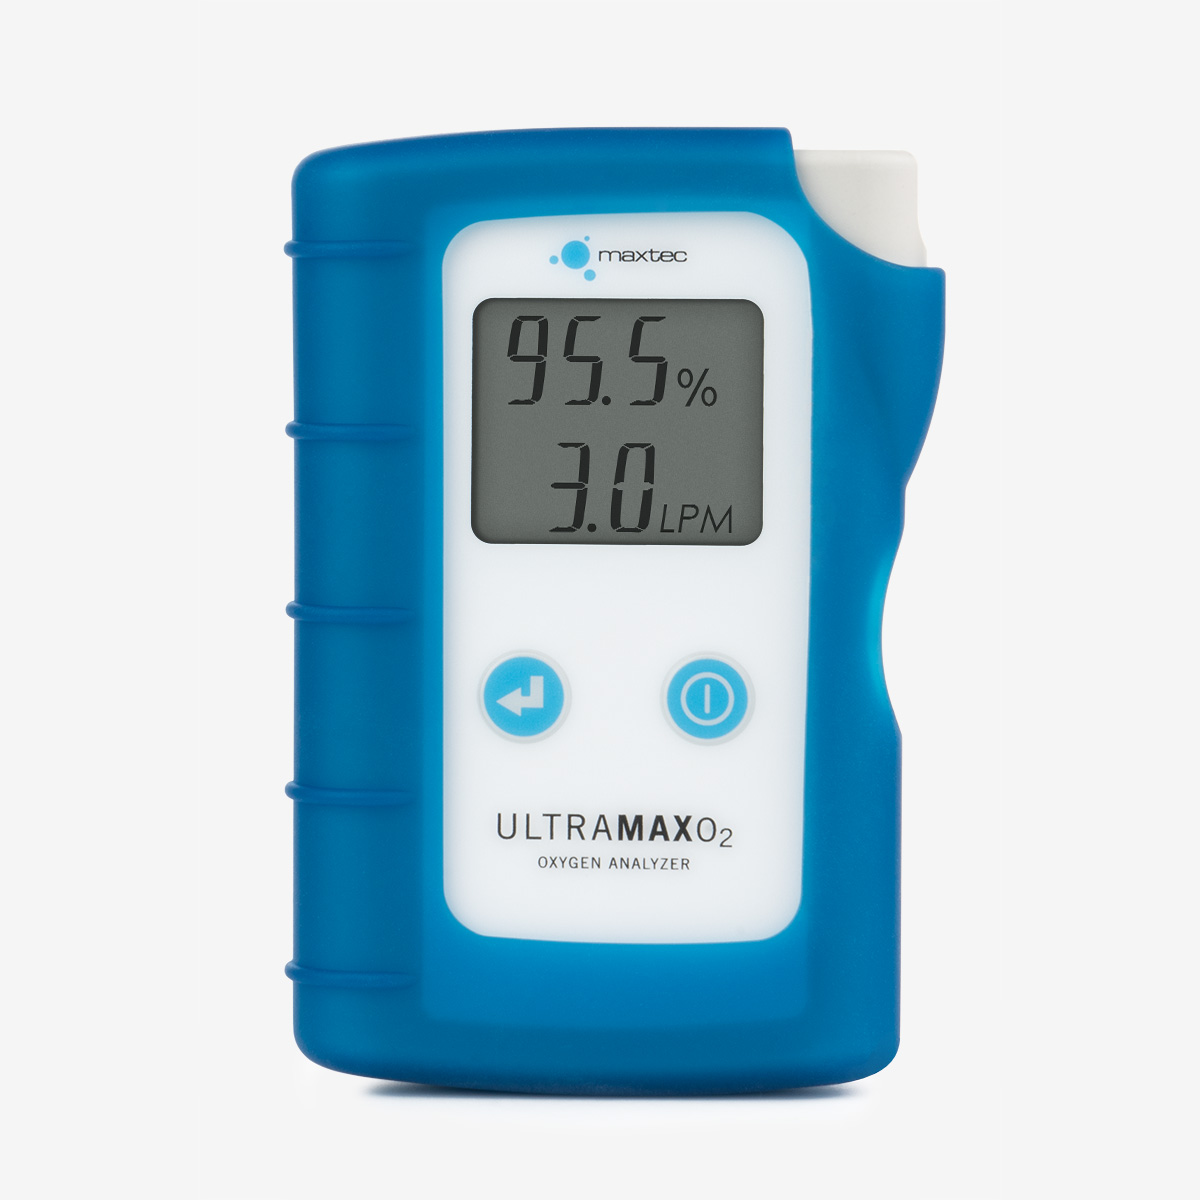 UltraMaxO2 Oxygen Analyzer front with blue silicone case